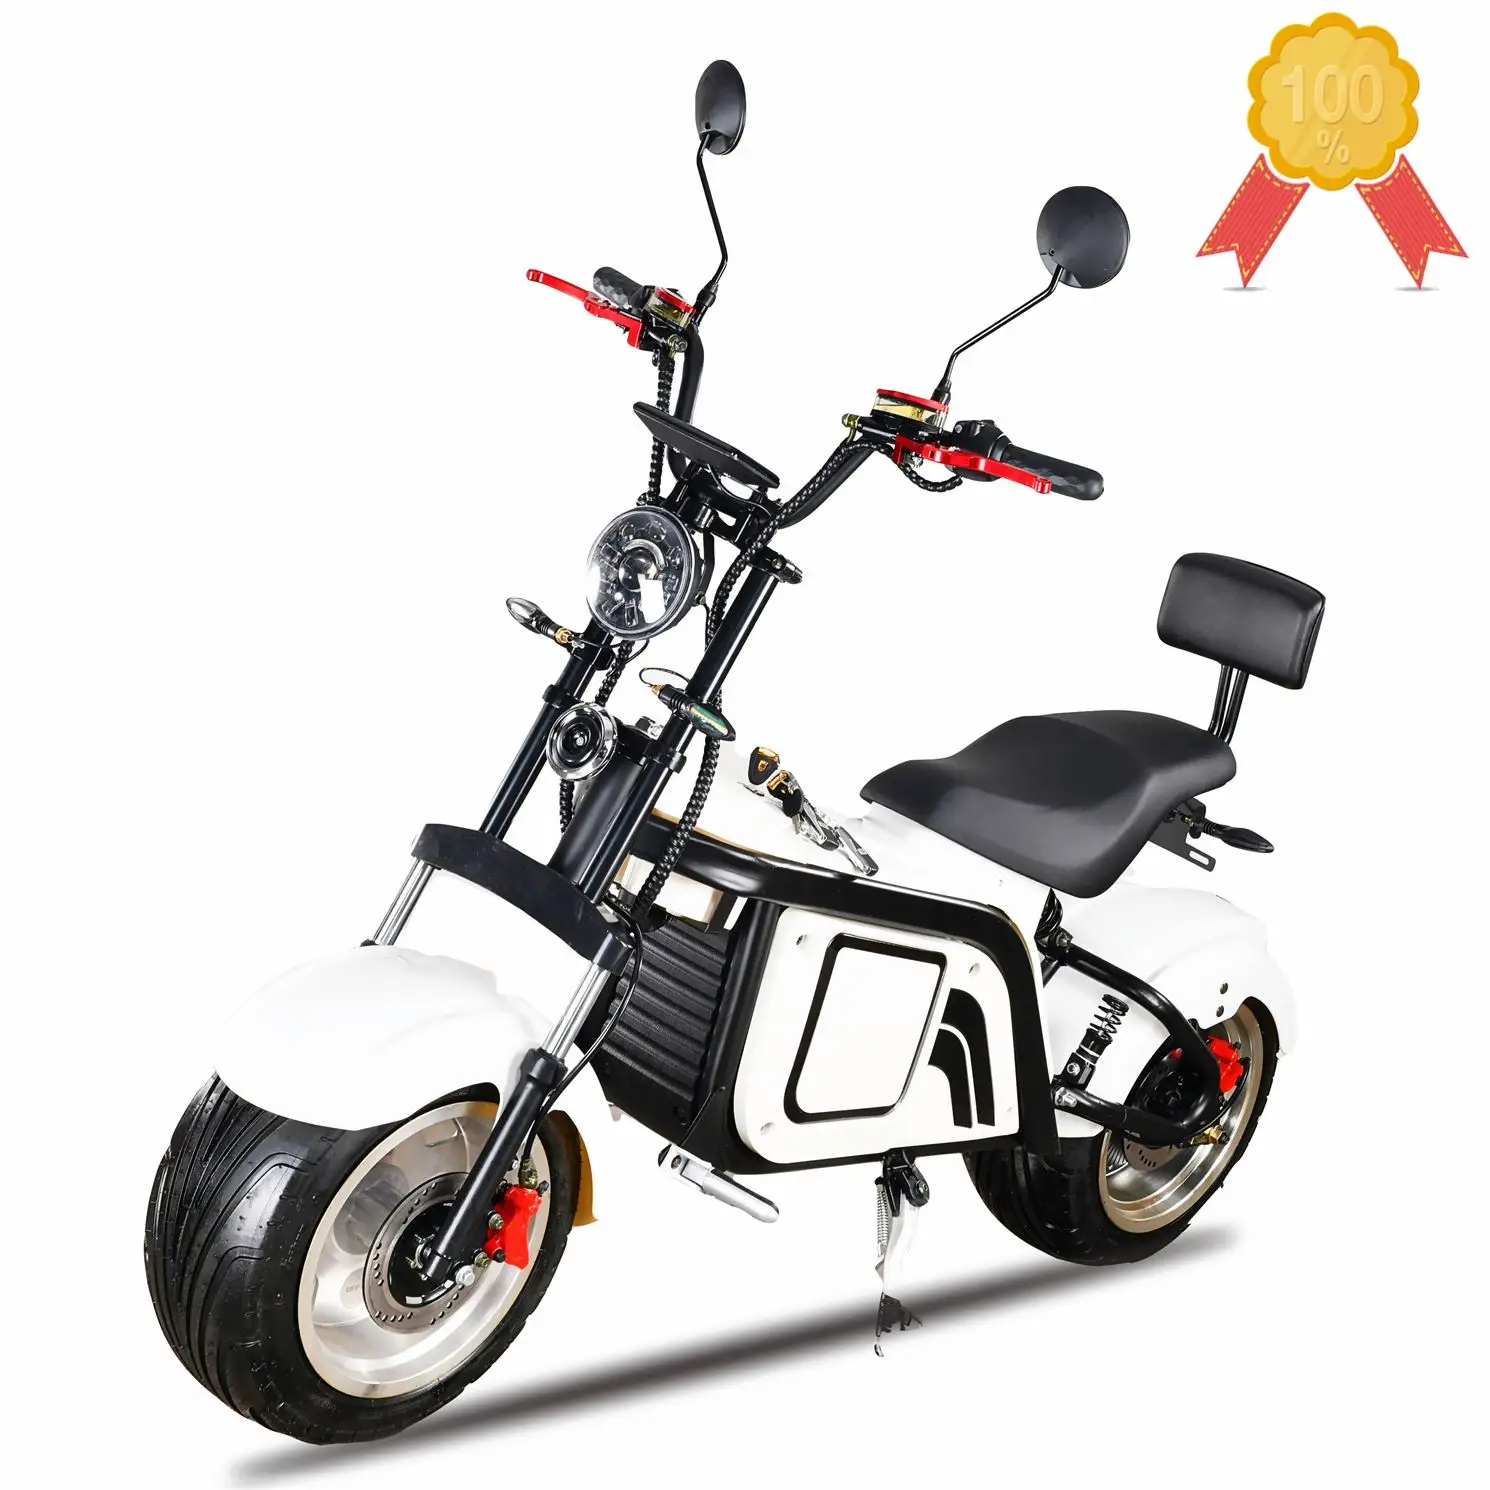 

2022 New Model TOP Speed 75Km/H Eec Coc Electric Scooter 3000W Electric Bike Scooter